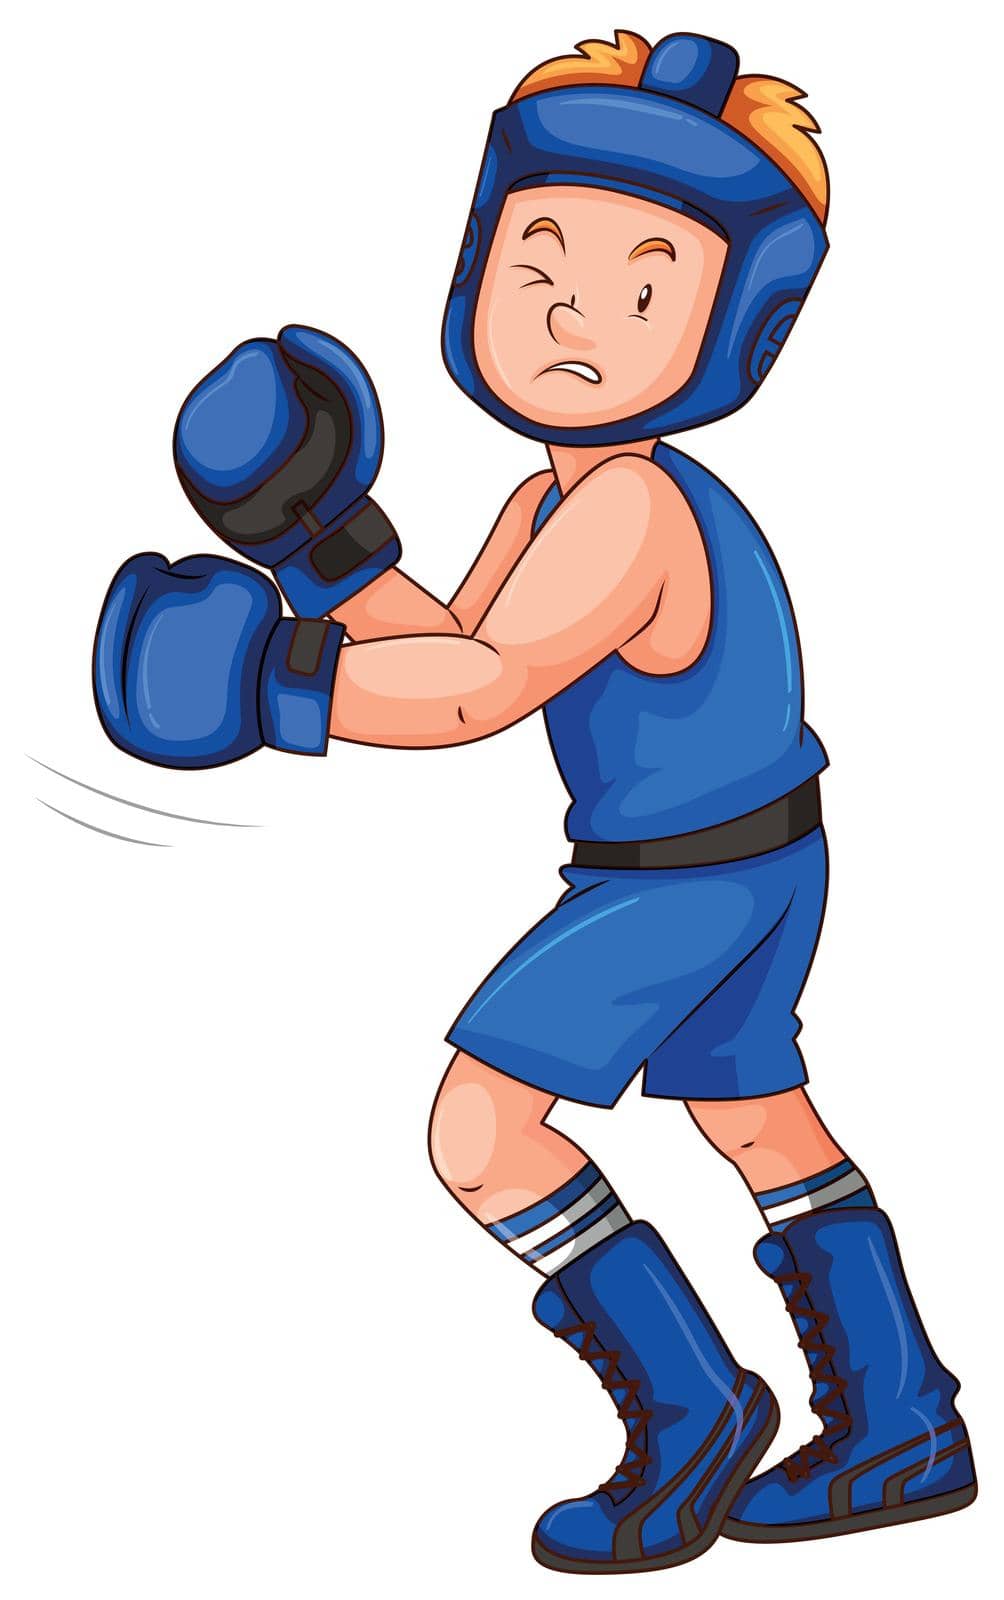 Boxer in blue costume with gloves and guard illustration